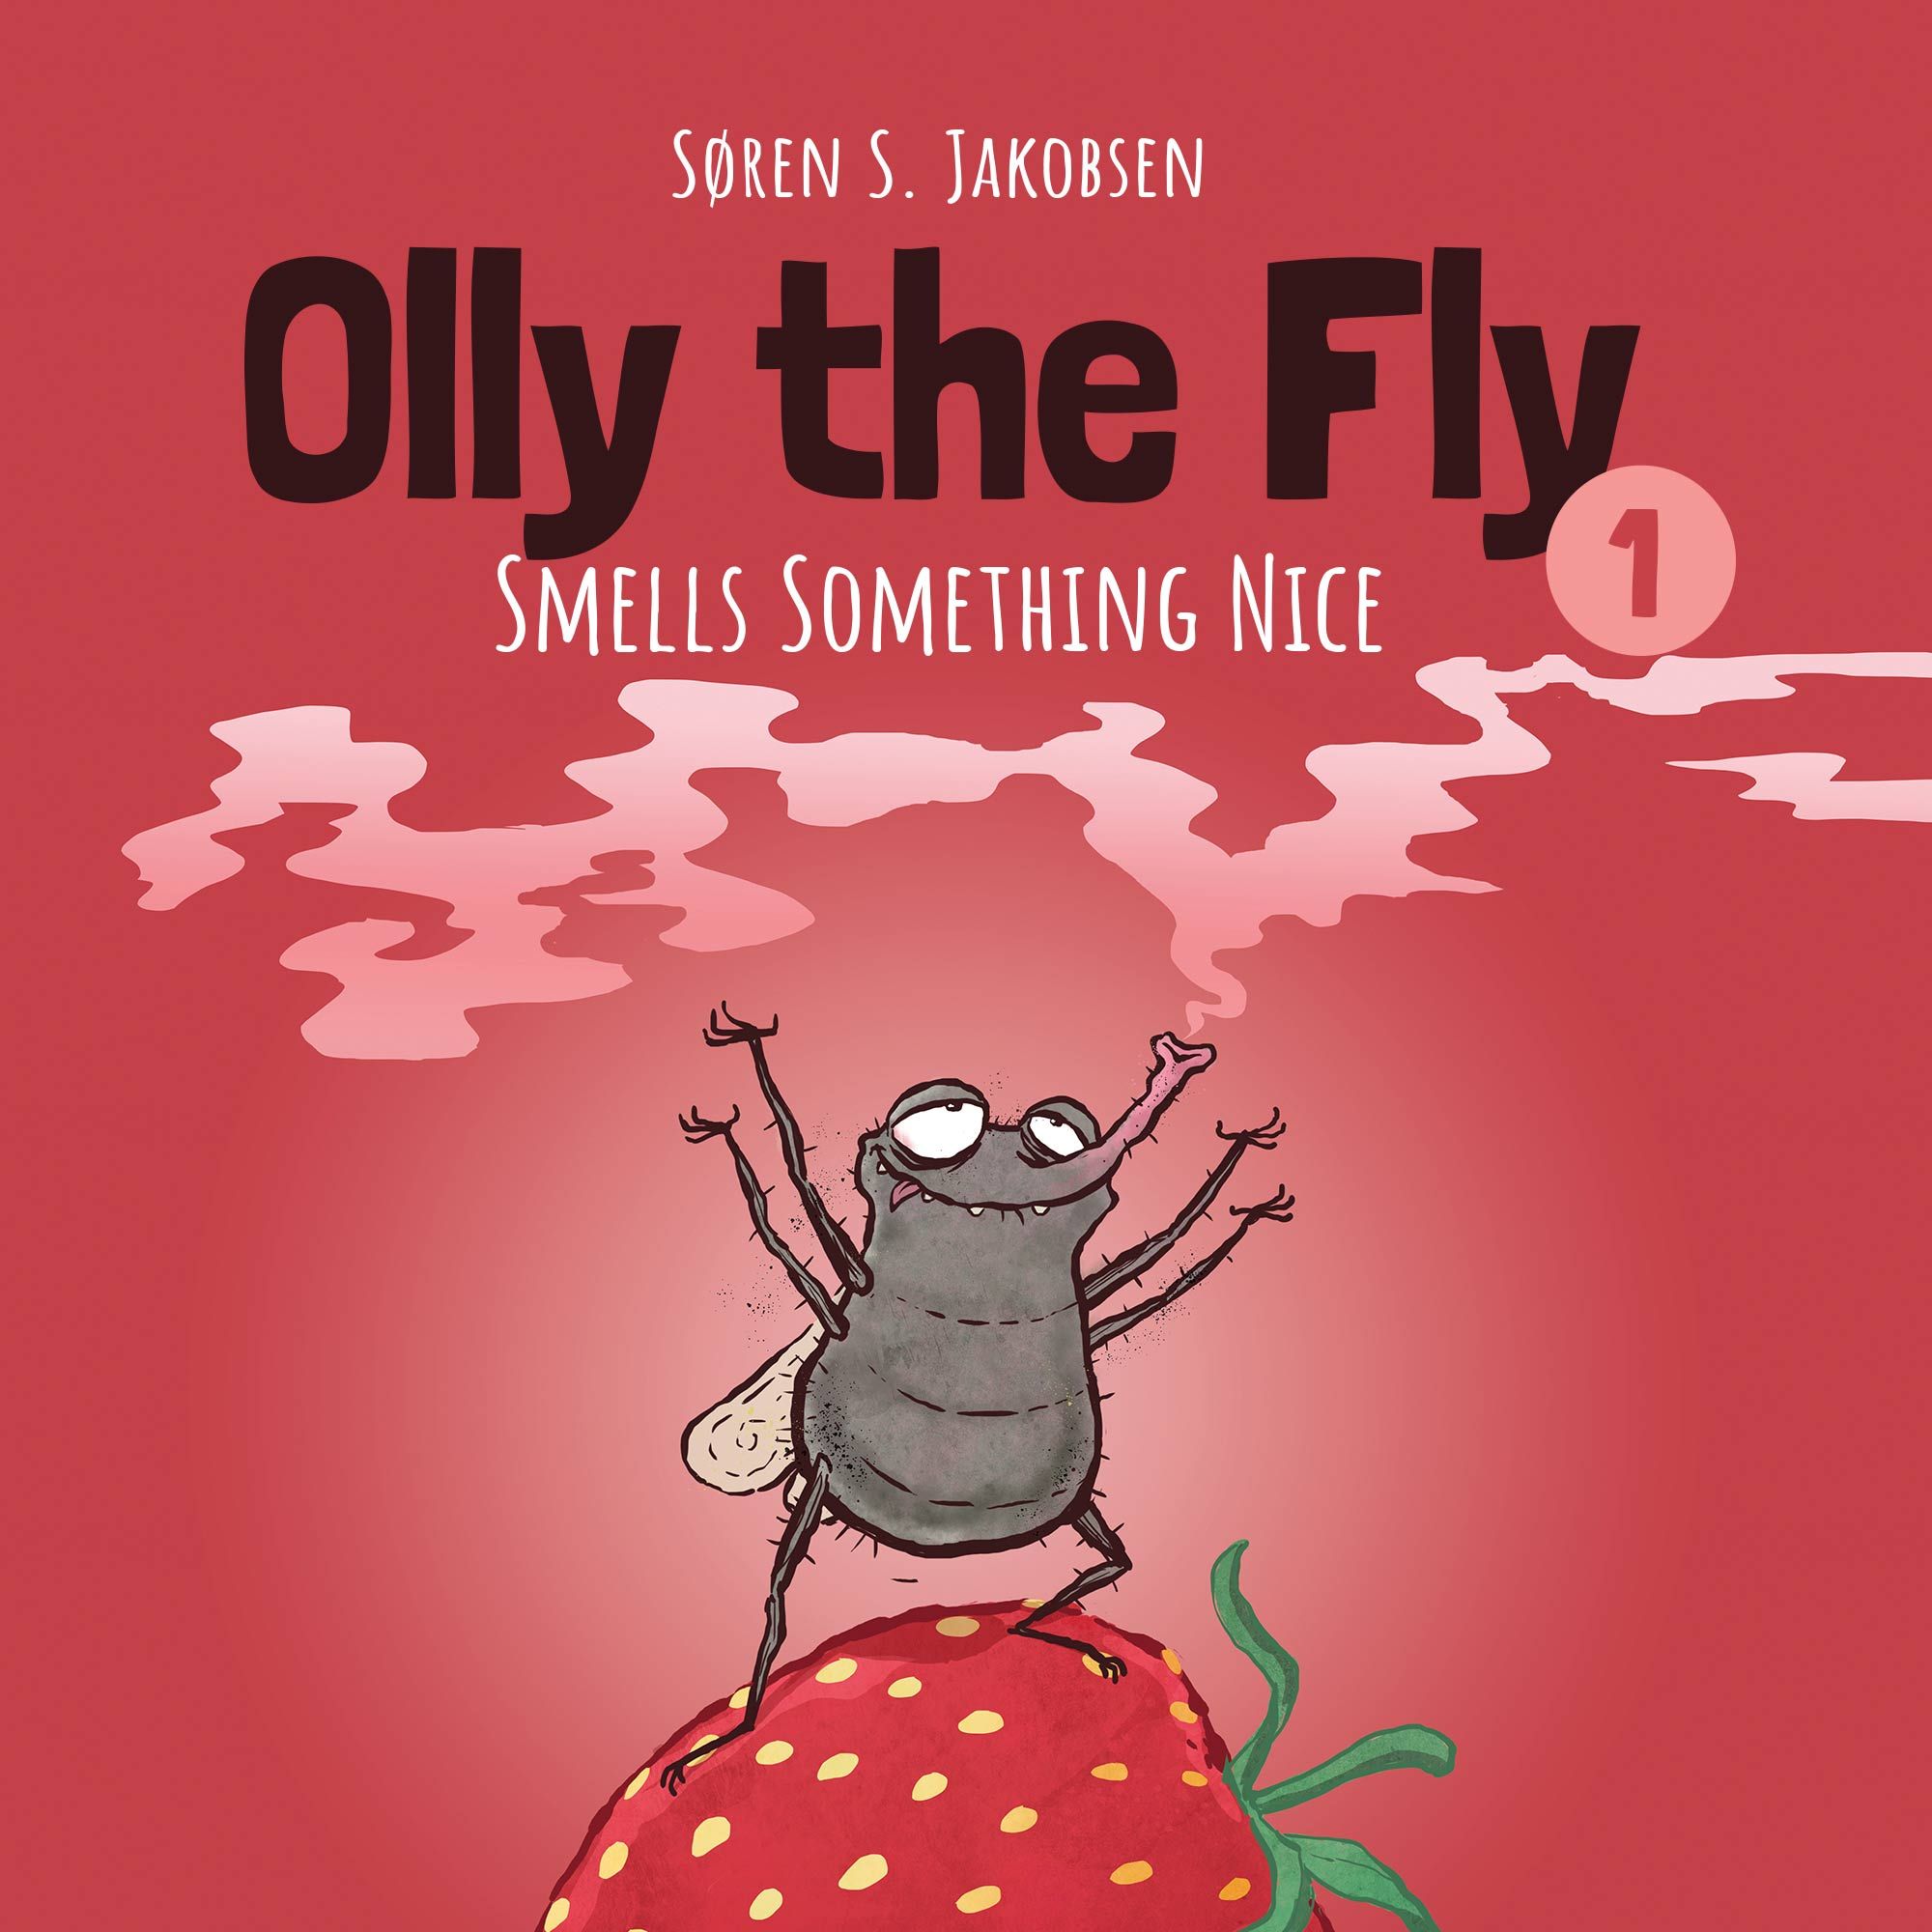 Olly the Fly #1: Olly the Fly Smells Something Nice, audiobook by Søren S. Jakobsen